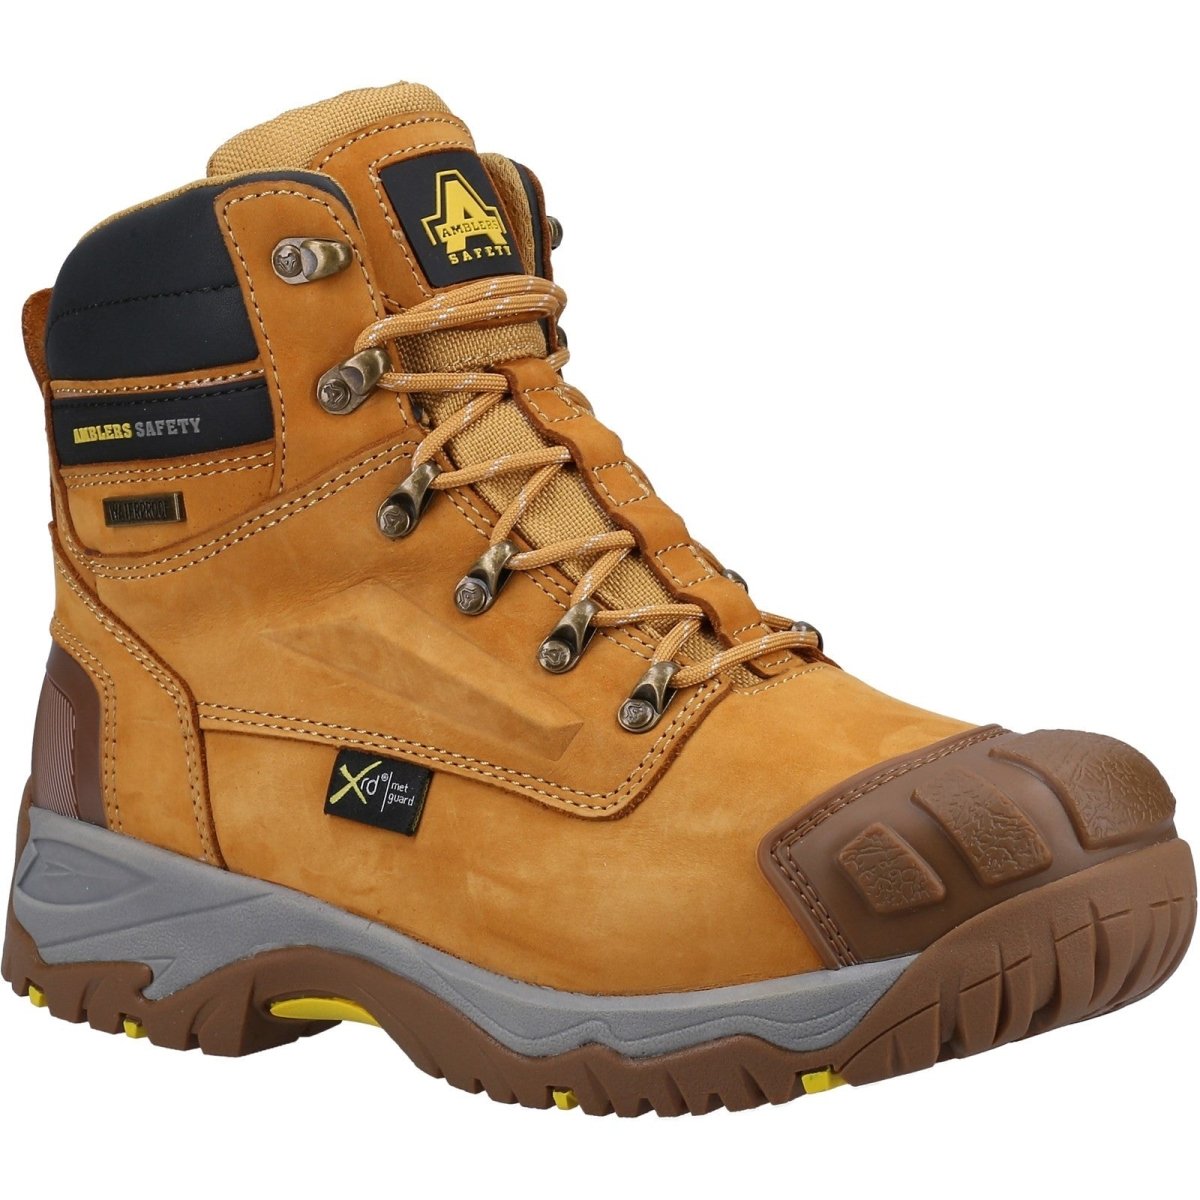 Amblers Safety AS986 Boots - Shoe Store Direct